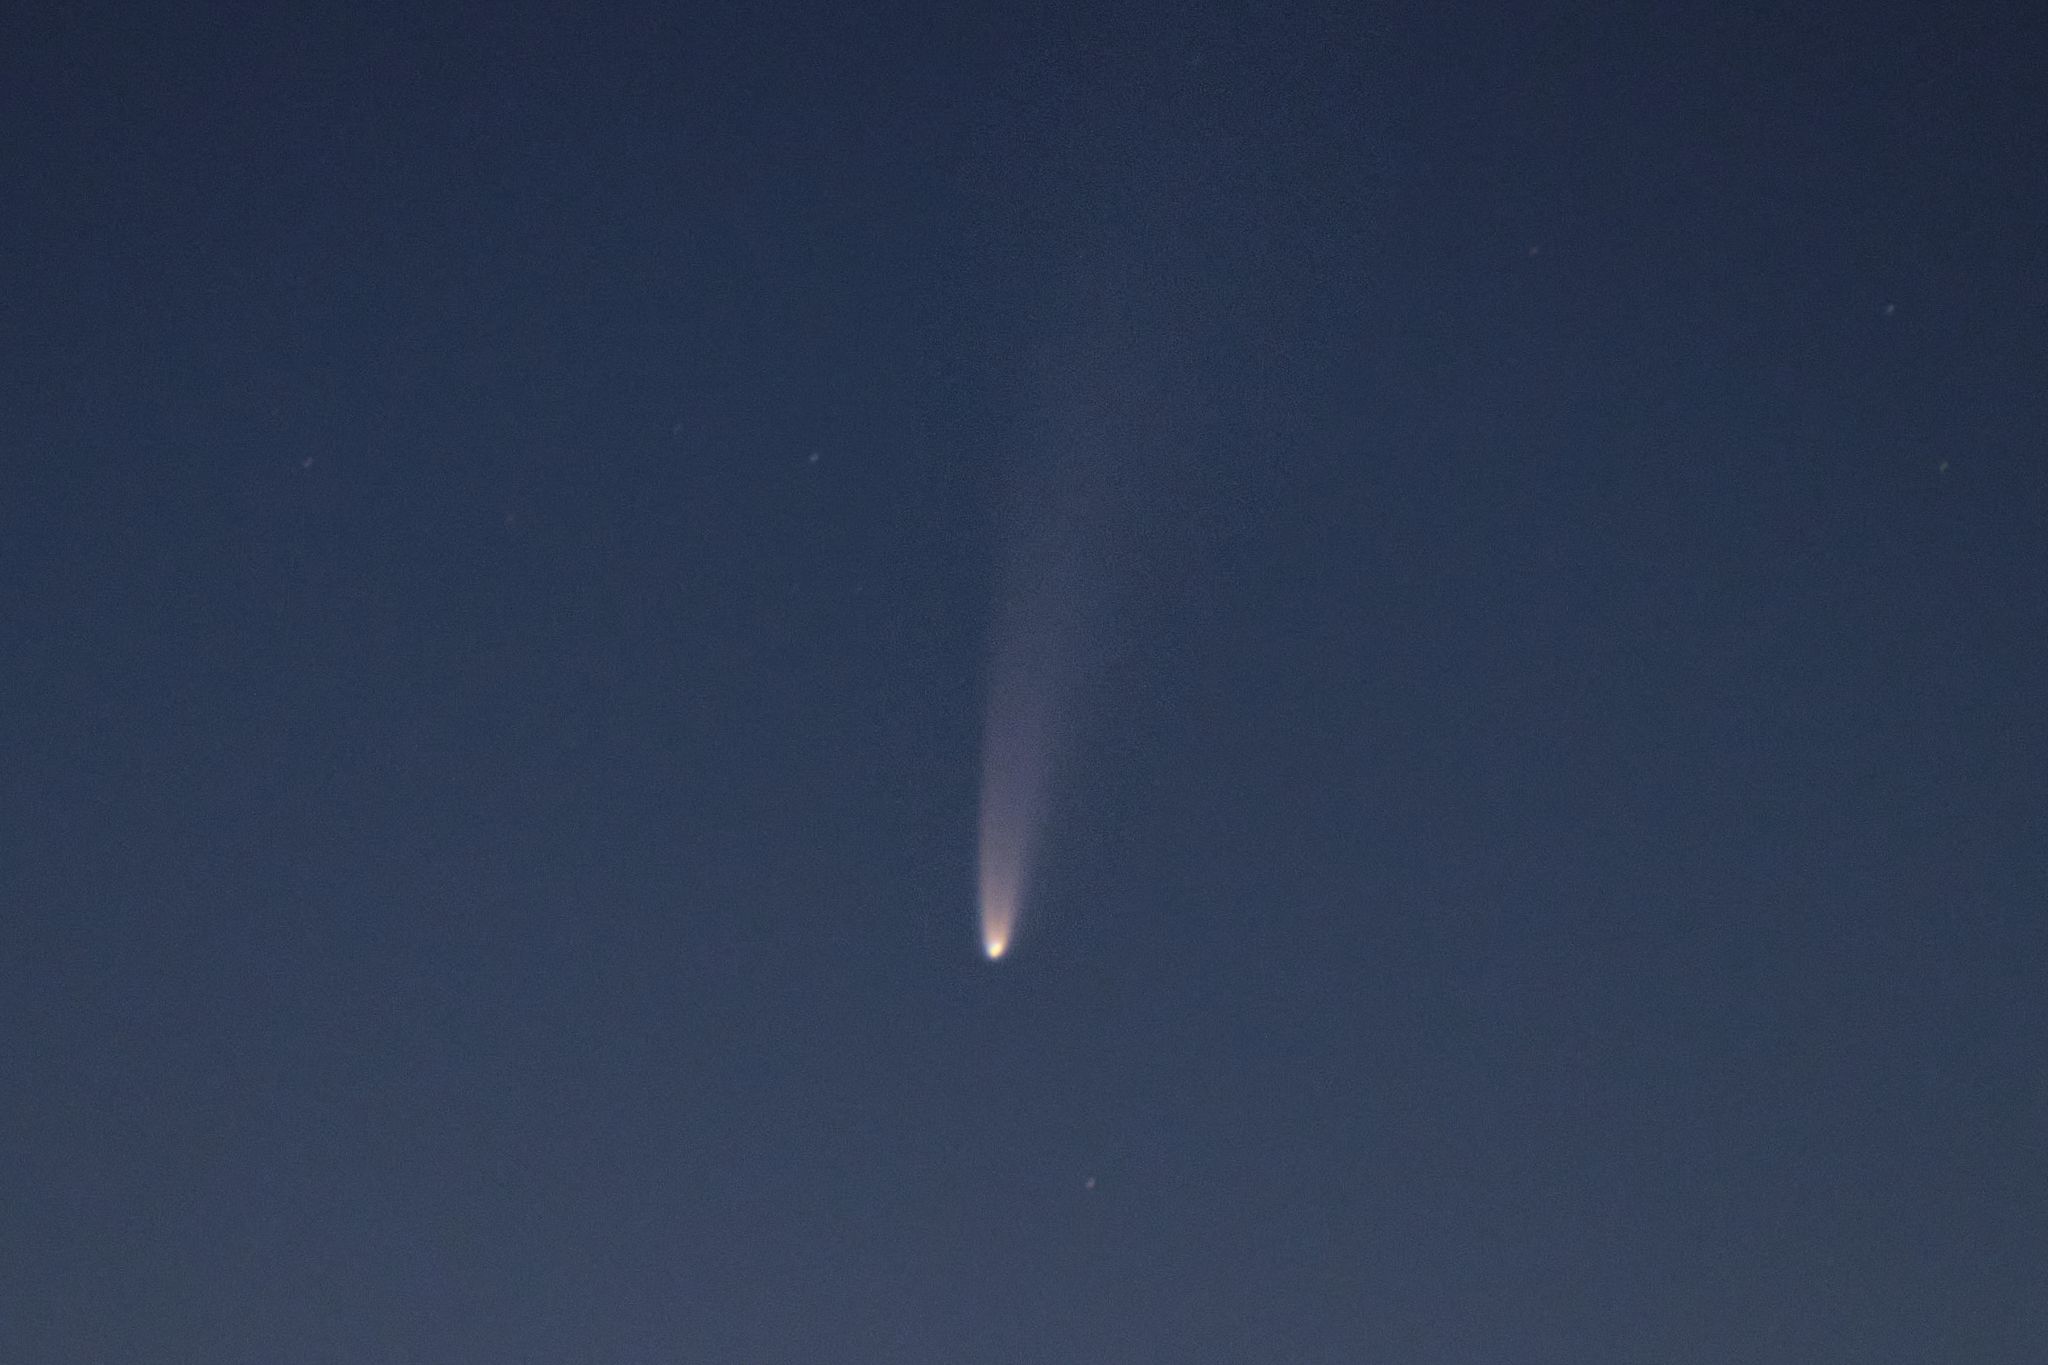 New comet streaking across the sky this month, visible to 